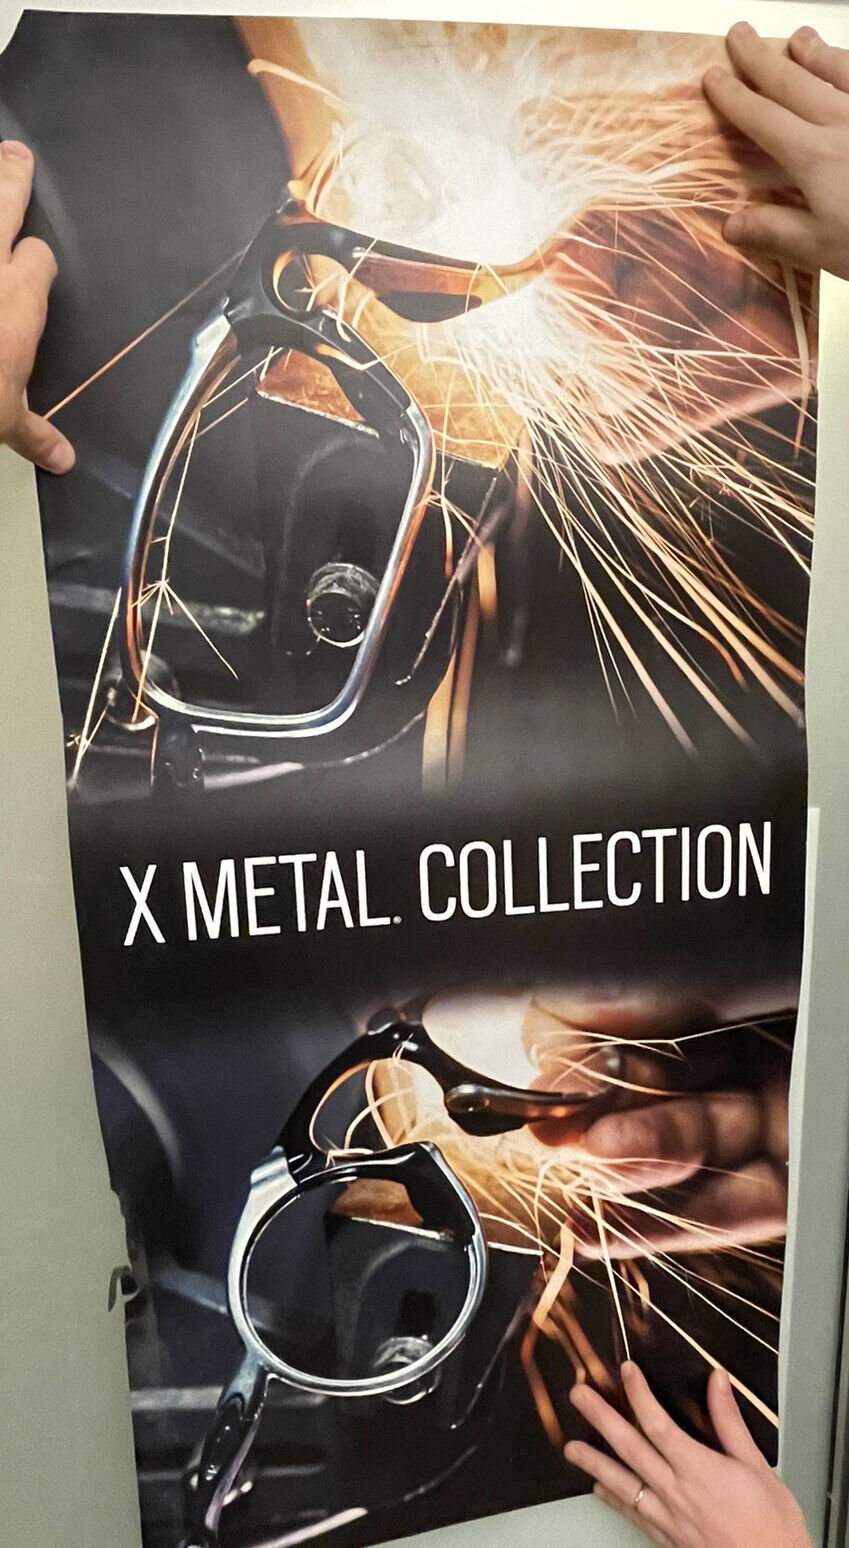 oakley x metal collection poster